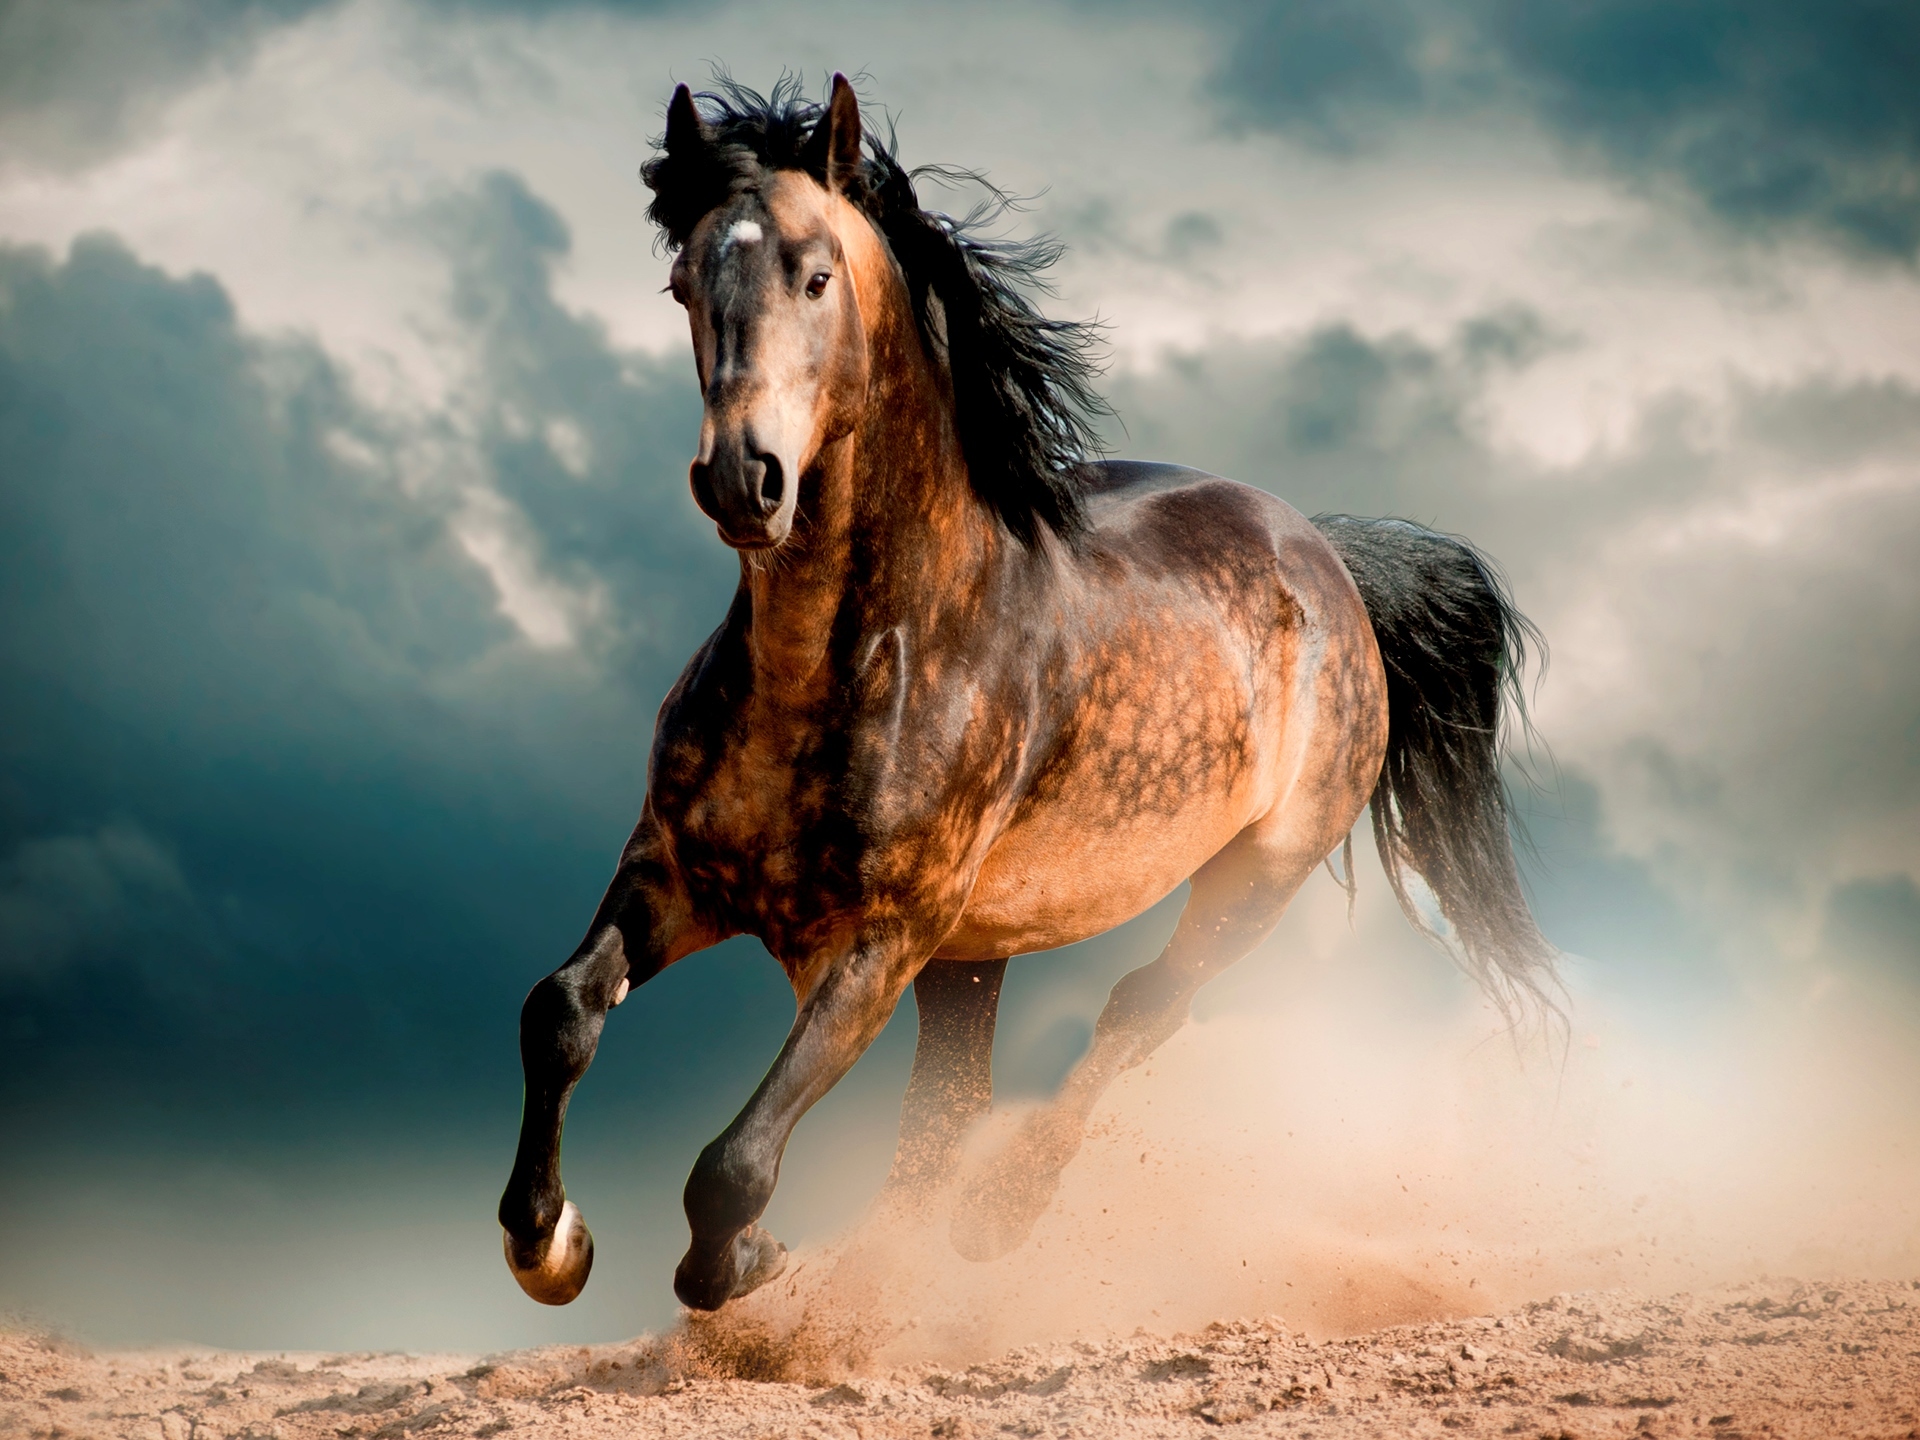 Horse Wild Dom Animal Dust Wind Picture Sky Clouds Photo